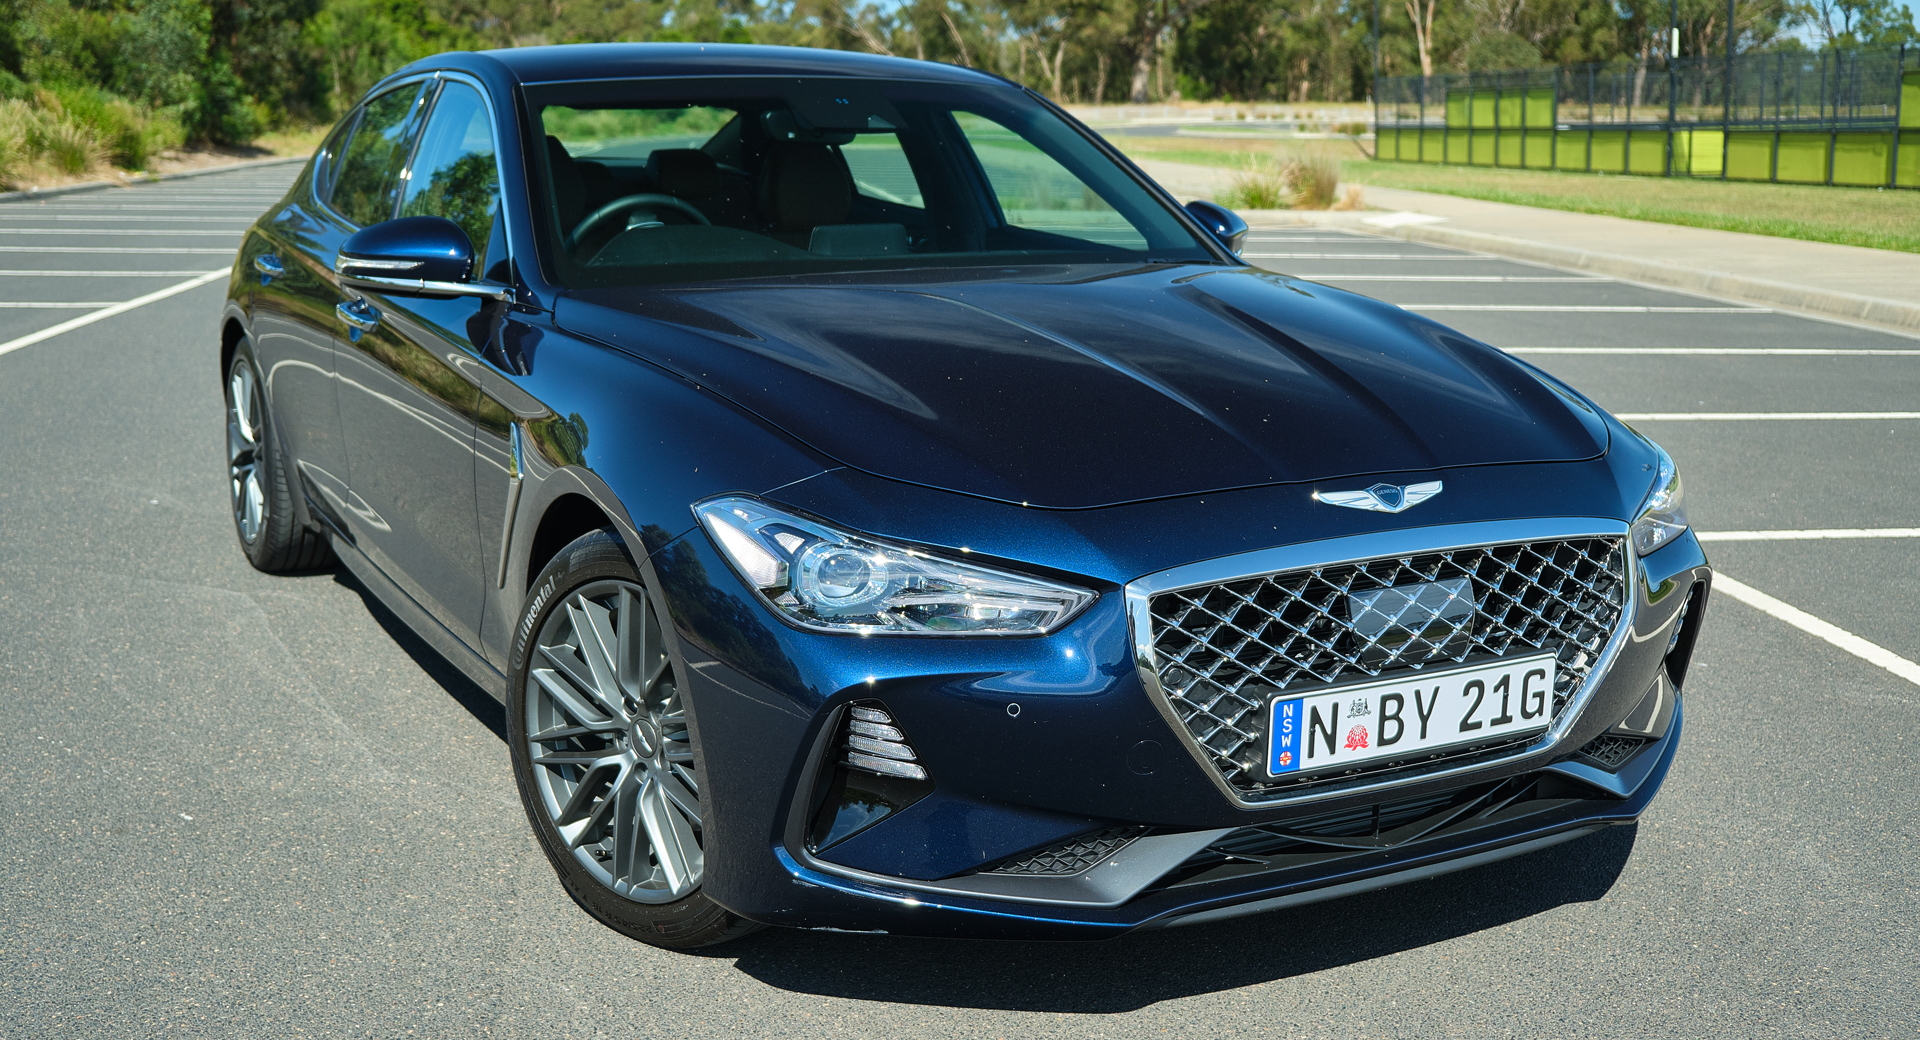 Pushed: 2020 Genesis G70 2.0T Would possibly Have Gotten A Refresh, However Is Nonetheless Very Competent Auto Recent